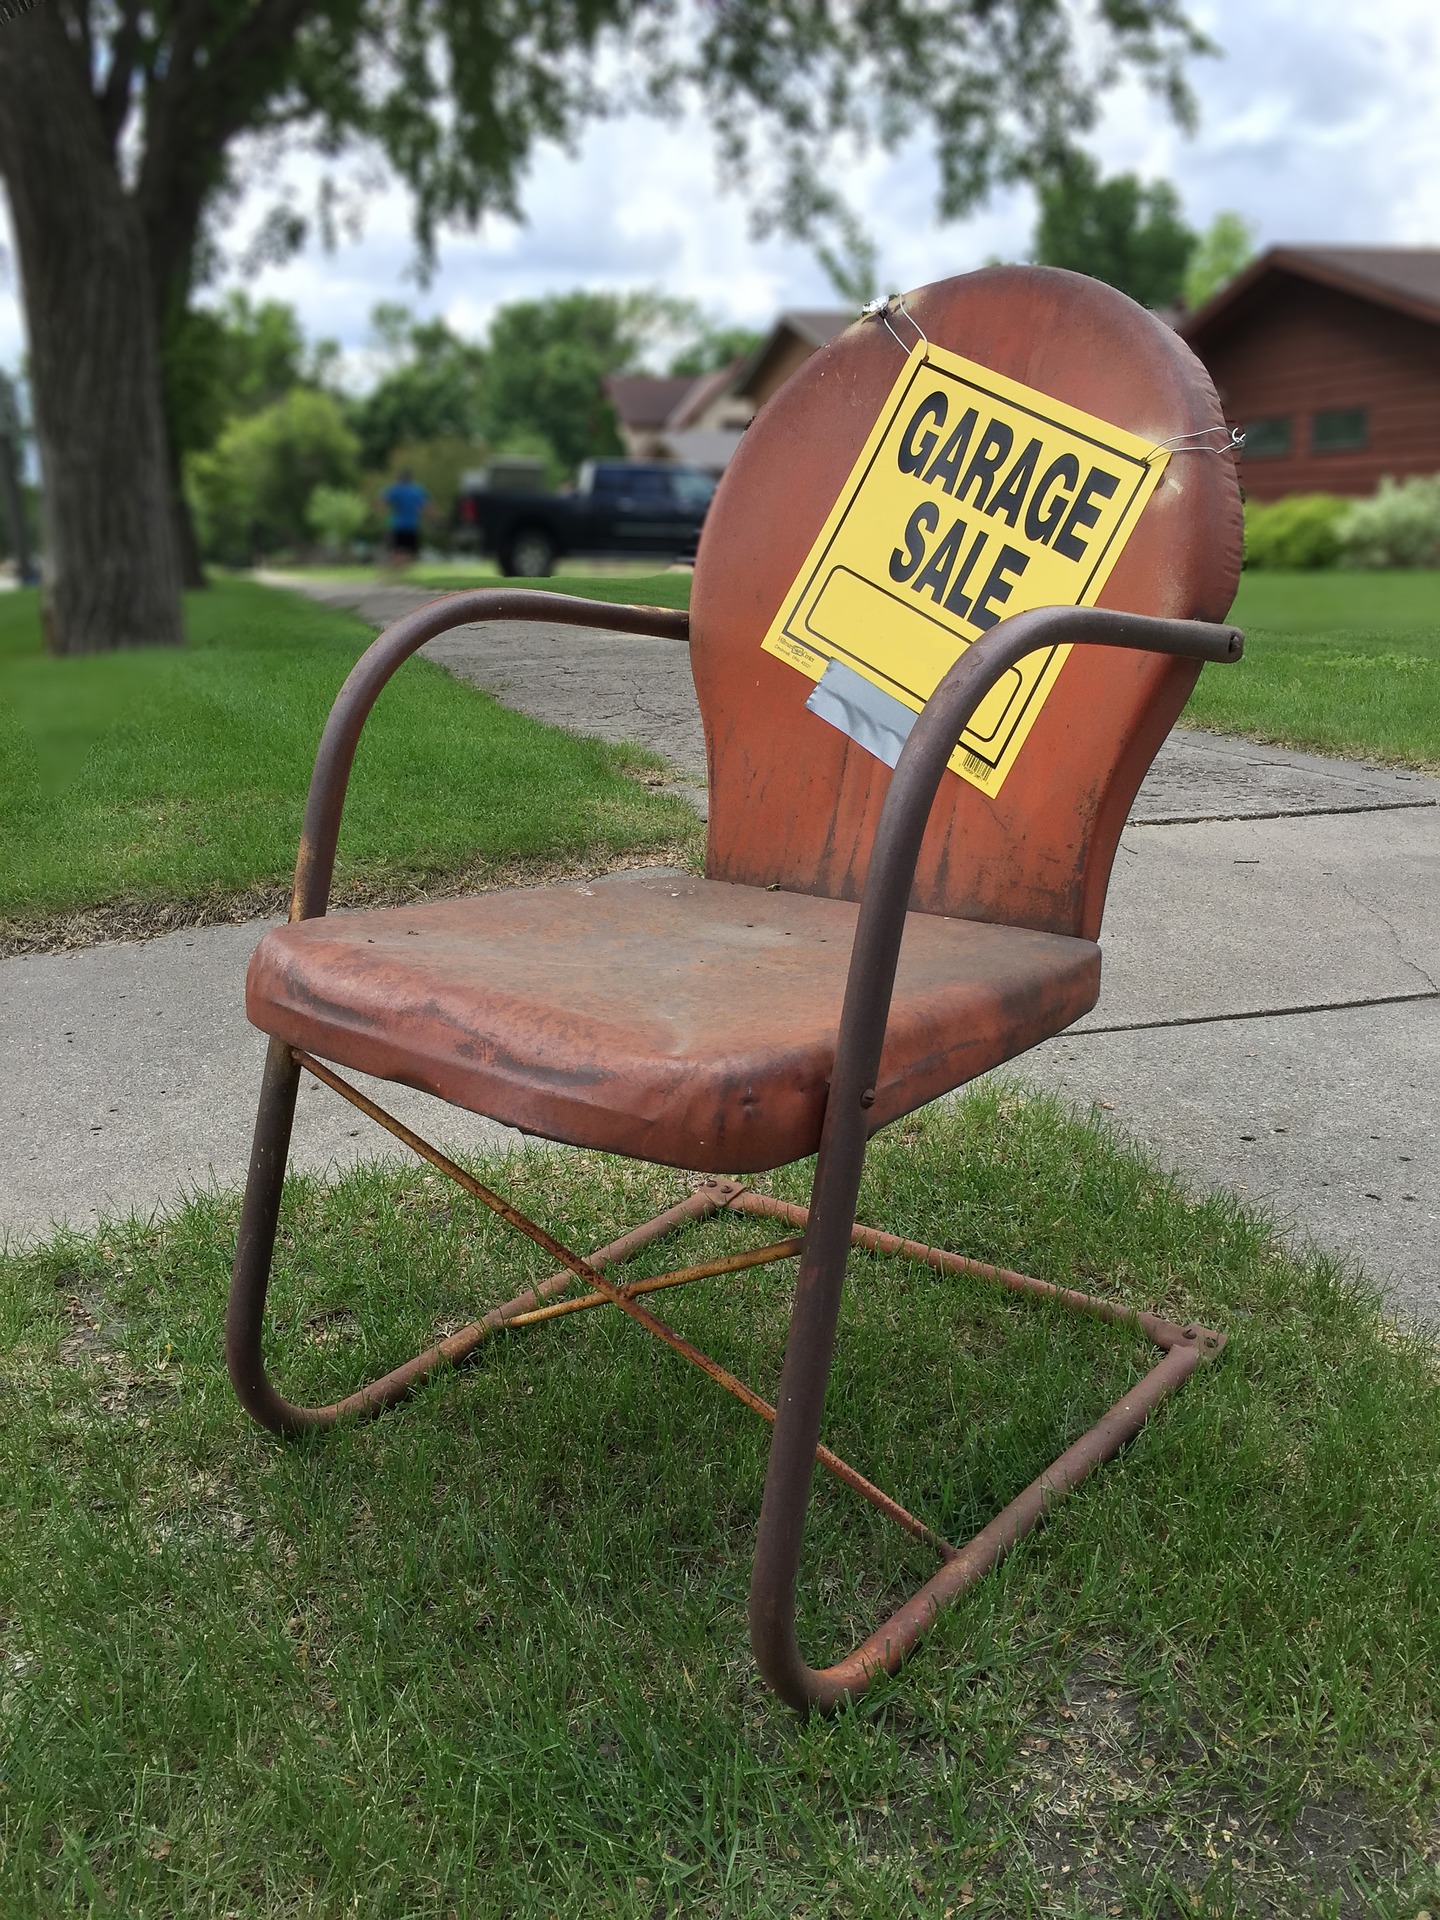 old chair displaying a garage sale sign